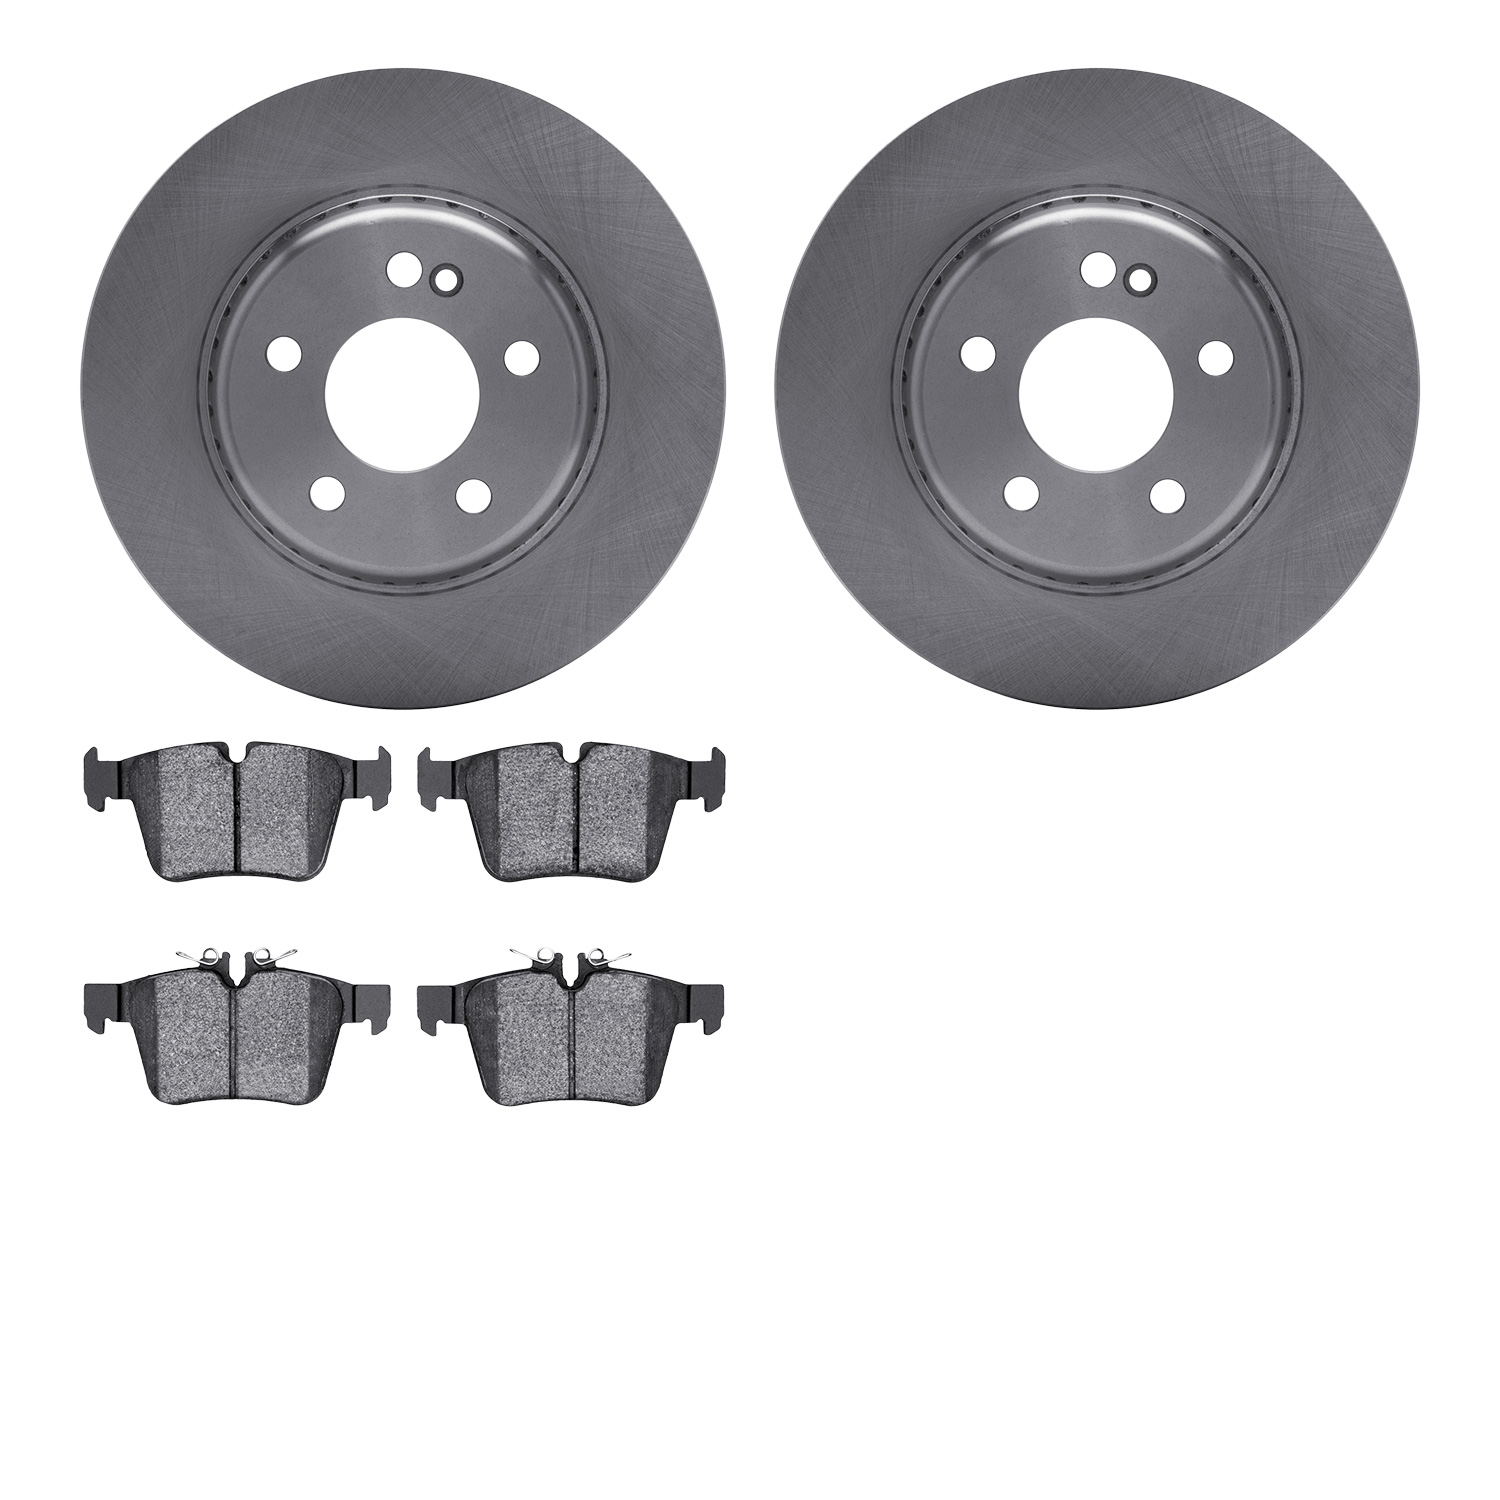 6302-63186 Brake Rotors with 3000-Series Ceramic Brake Pads Kit, Fits Select Mercedes-Benz, Position: Rear